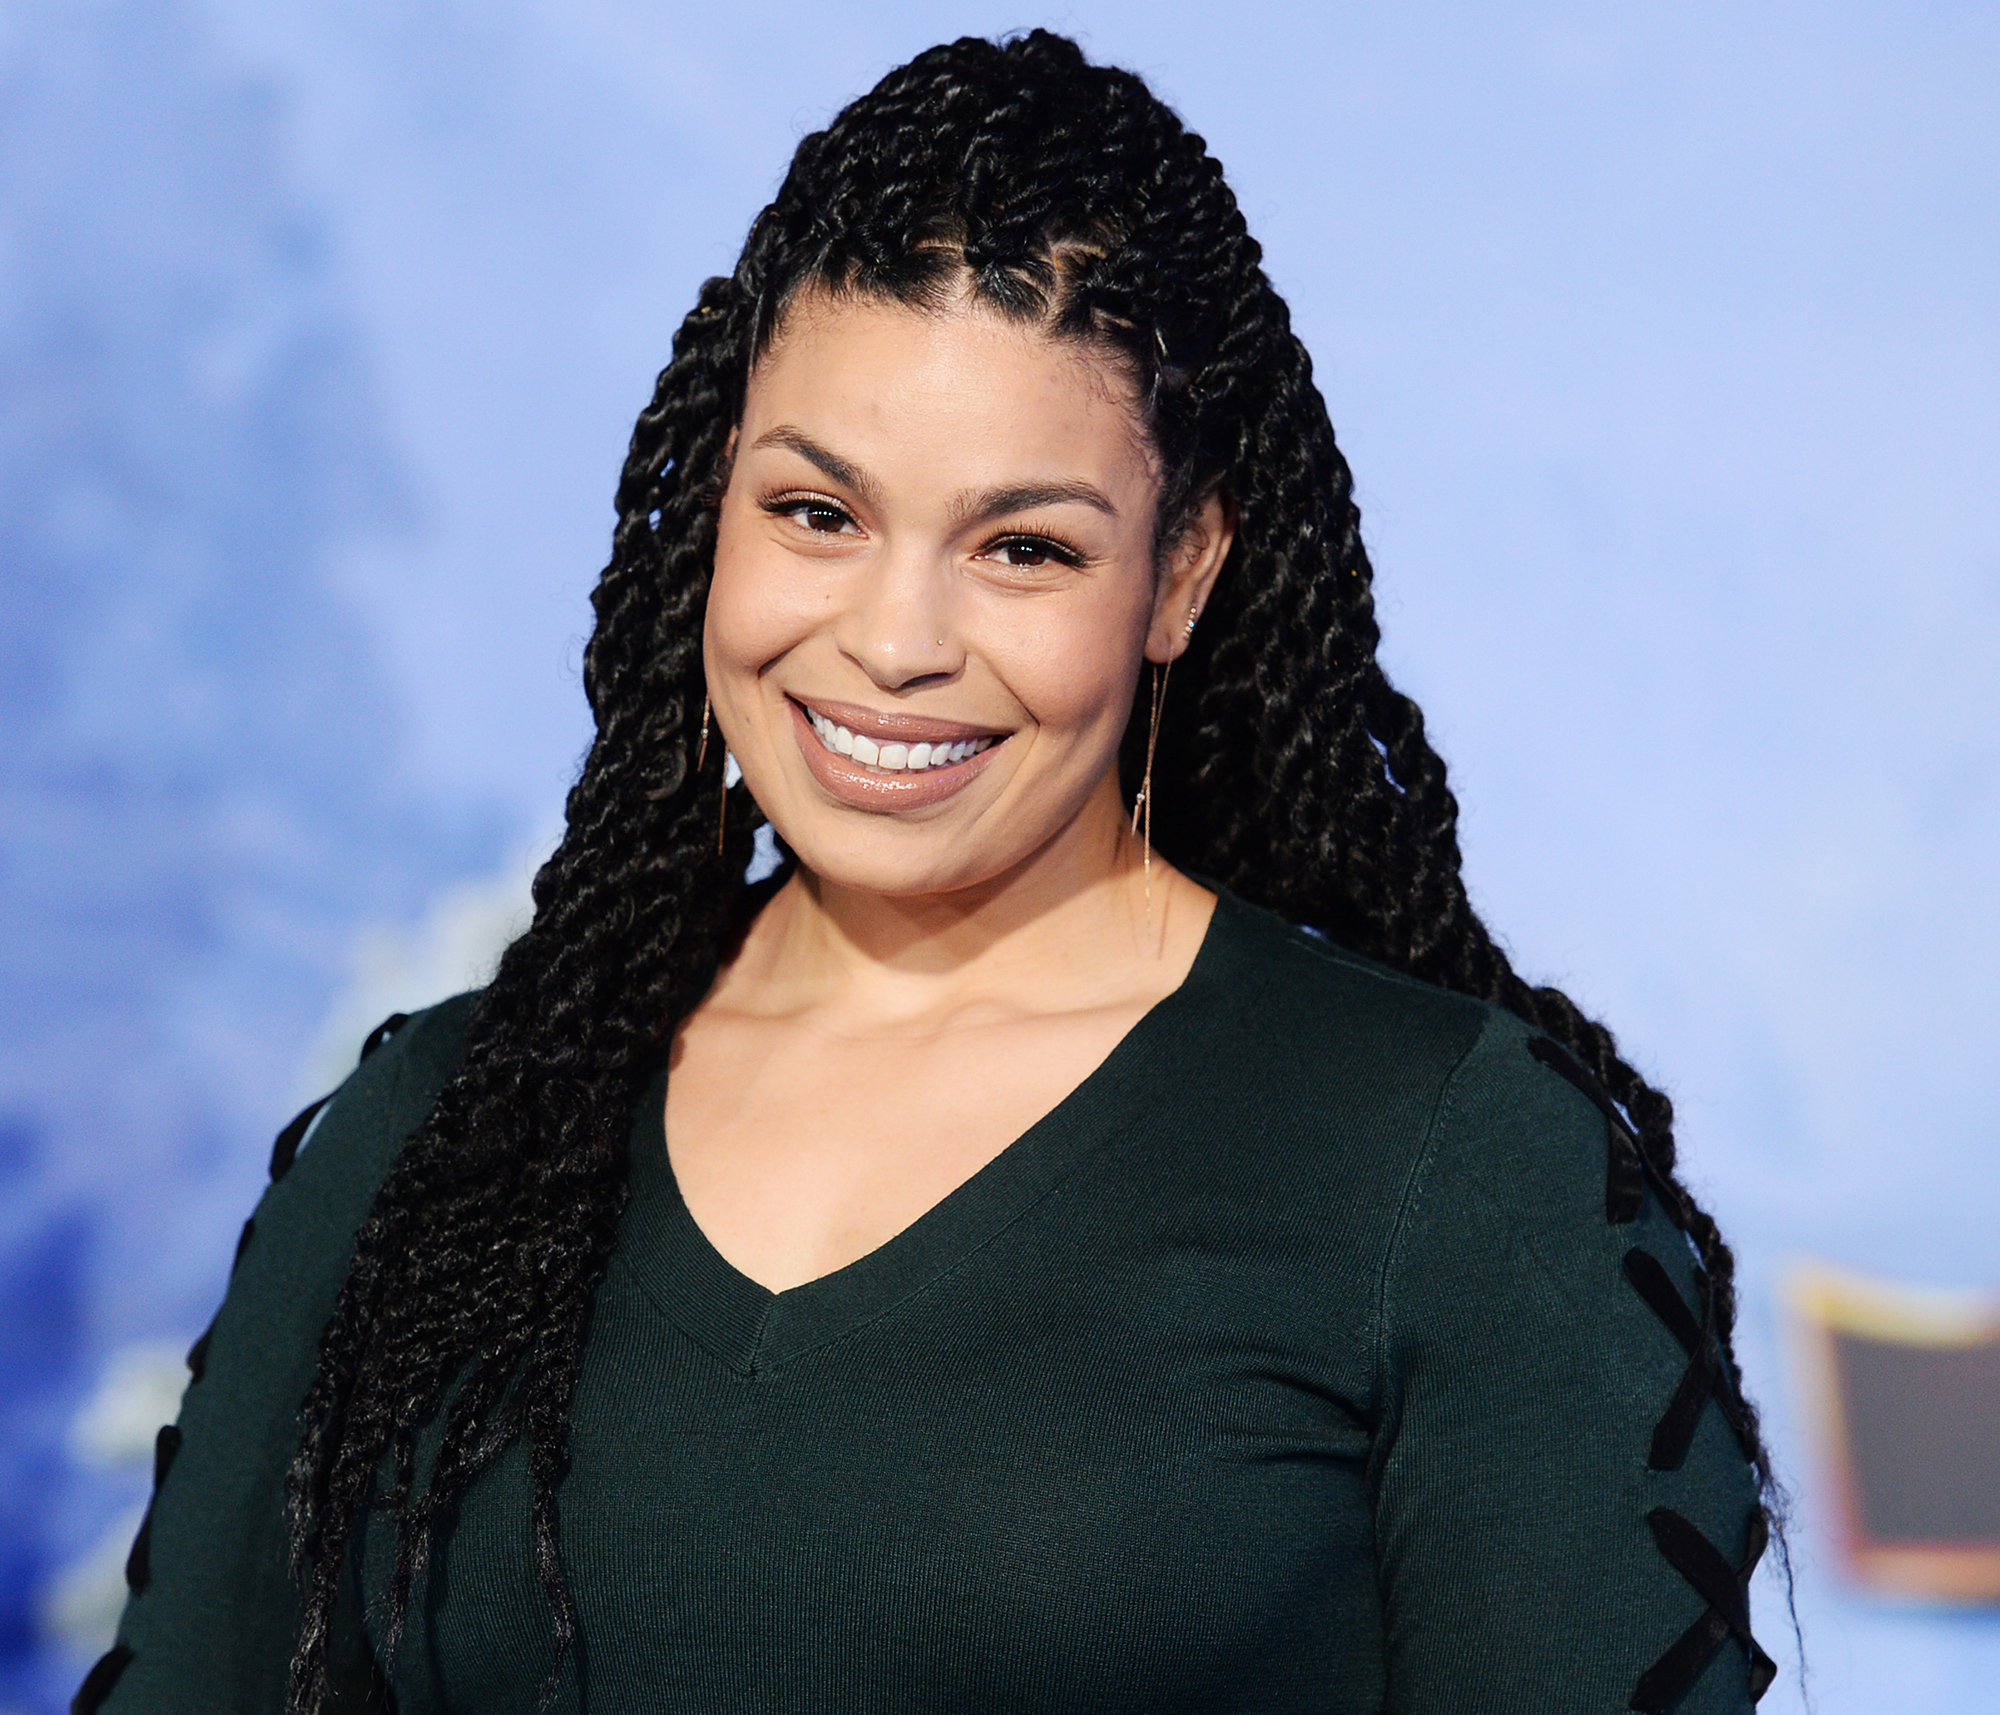 Jordin Sparks: 25 Things You Don't Know About Me